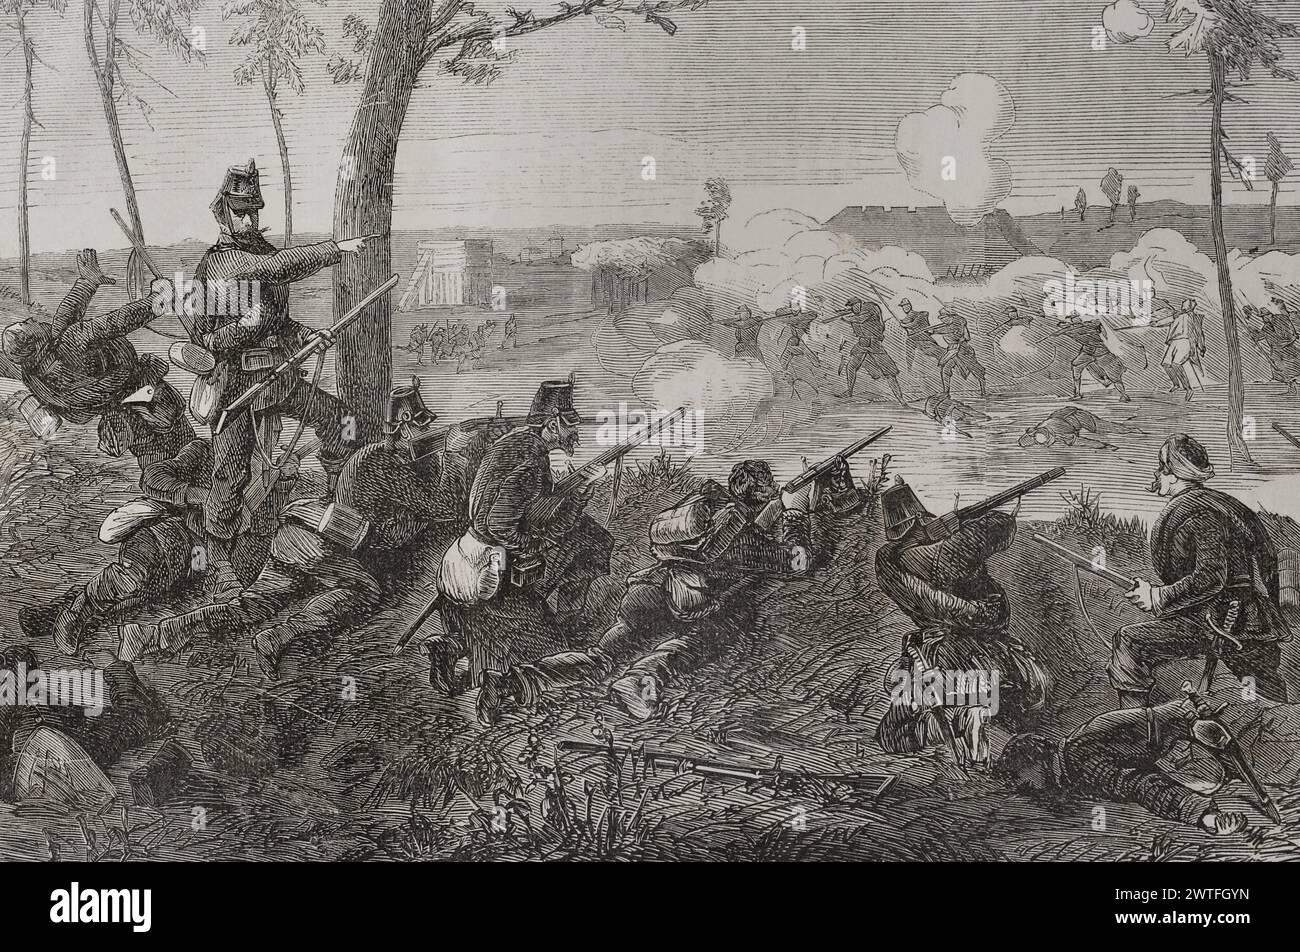 Franco-Prussian War (1870-1871). Siege of Paris (19 September 1870 to 28 January 1871). Skirmishes between the Prussian outposts encircling Paris and the besieged. Engraving by Capuz. 'Historia de la Guerra de Francia y Prusia' (History of the War between France and Prussia). Volume II. Published in Barcelona, 1871. Author: Tomás Carlos Capuz (1834-1899). Spanish engraver. Stock Photo